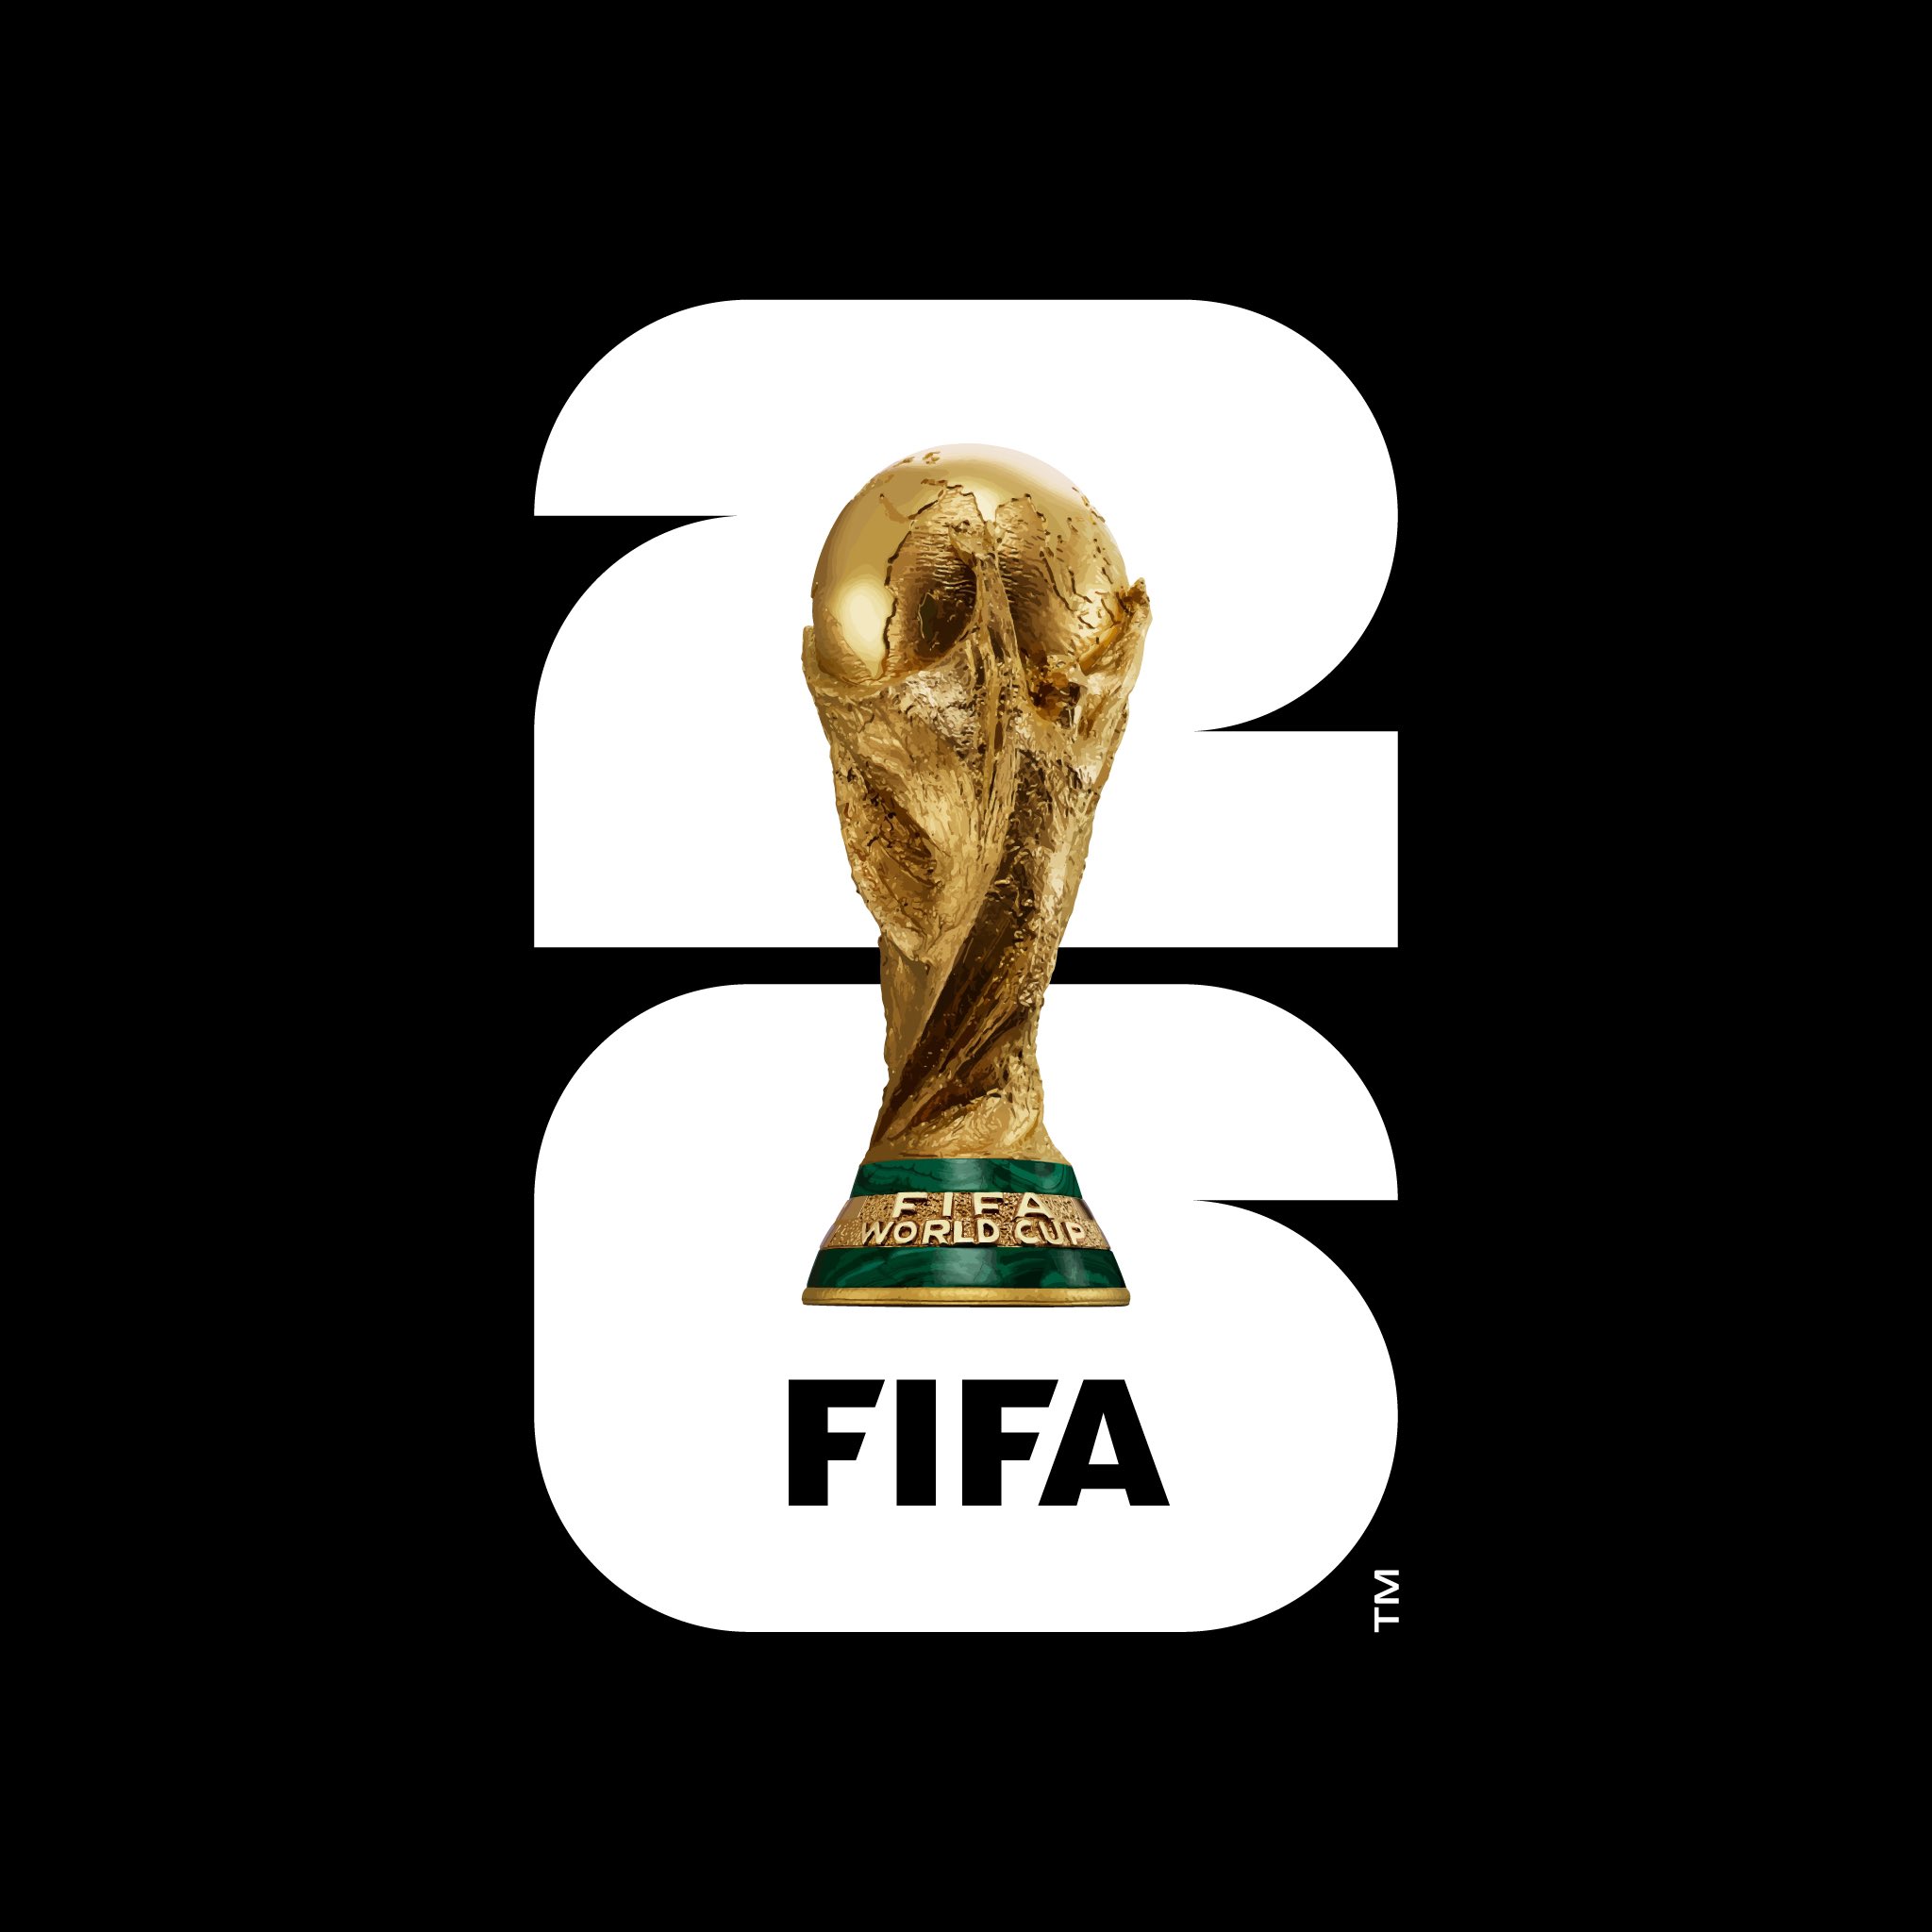 NFF set 2026 World Cup quarterfinal target for Finidi